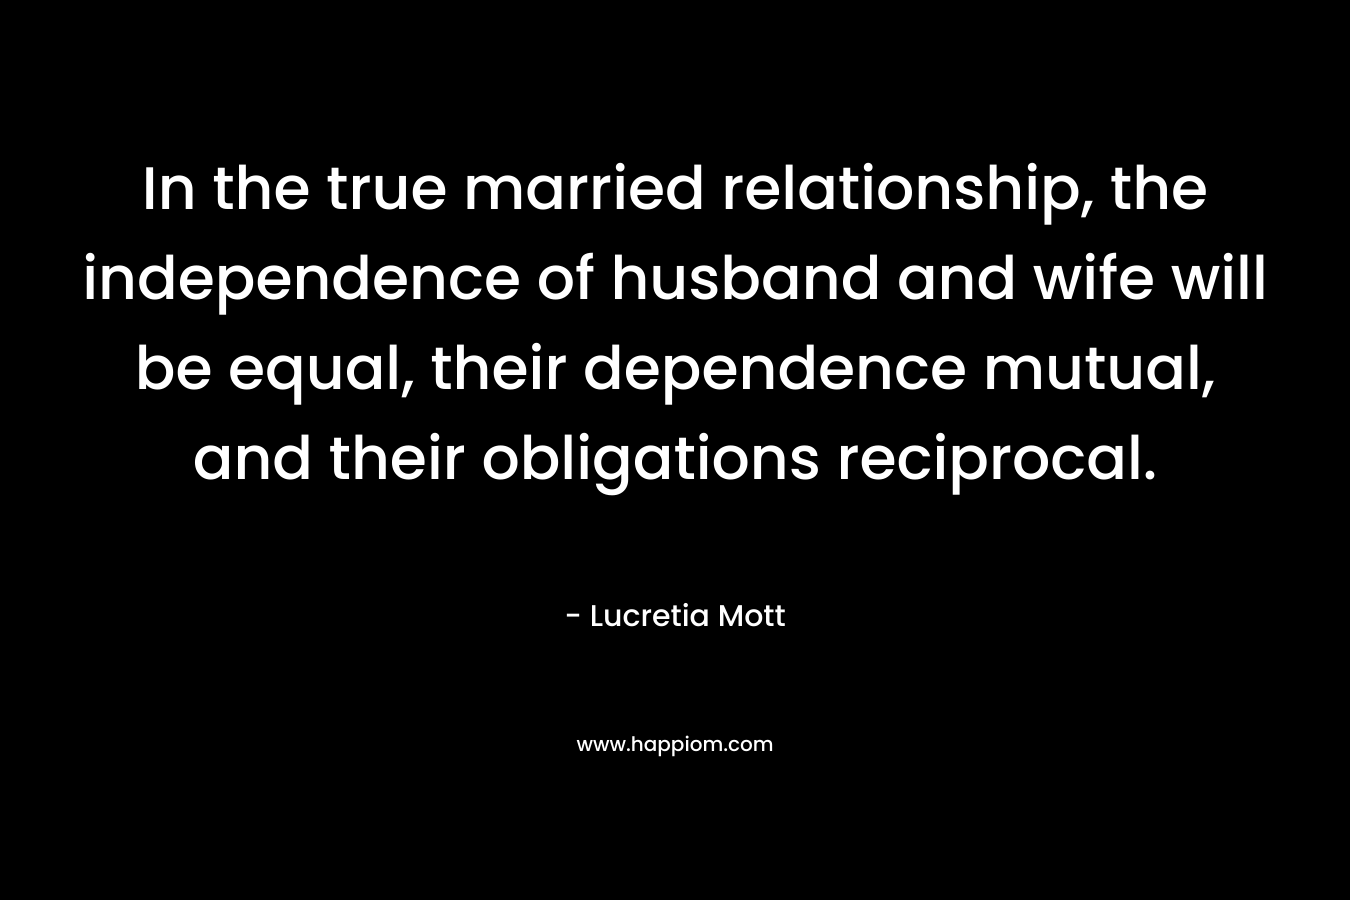 In the true married relationship, the independence of husband and wife will be equal, their dependence mutual, and their obligations reciprocal.